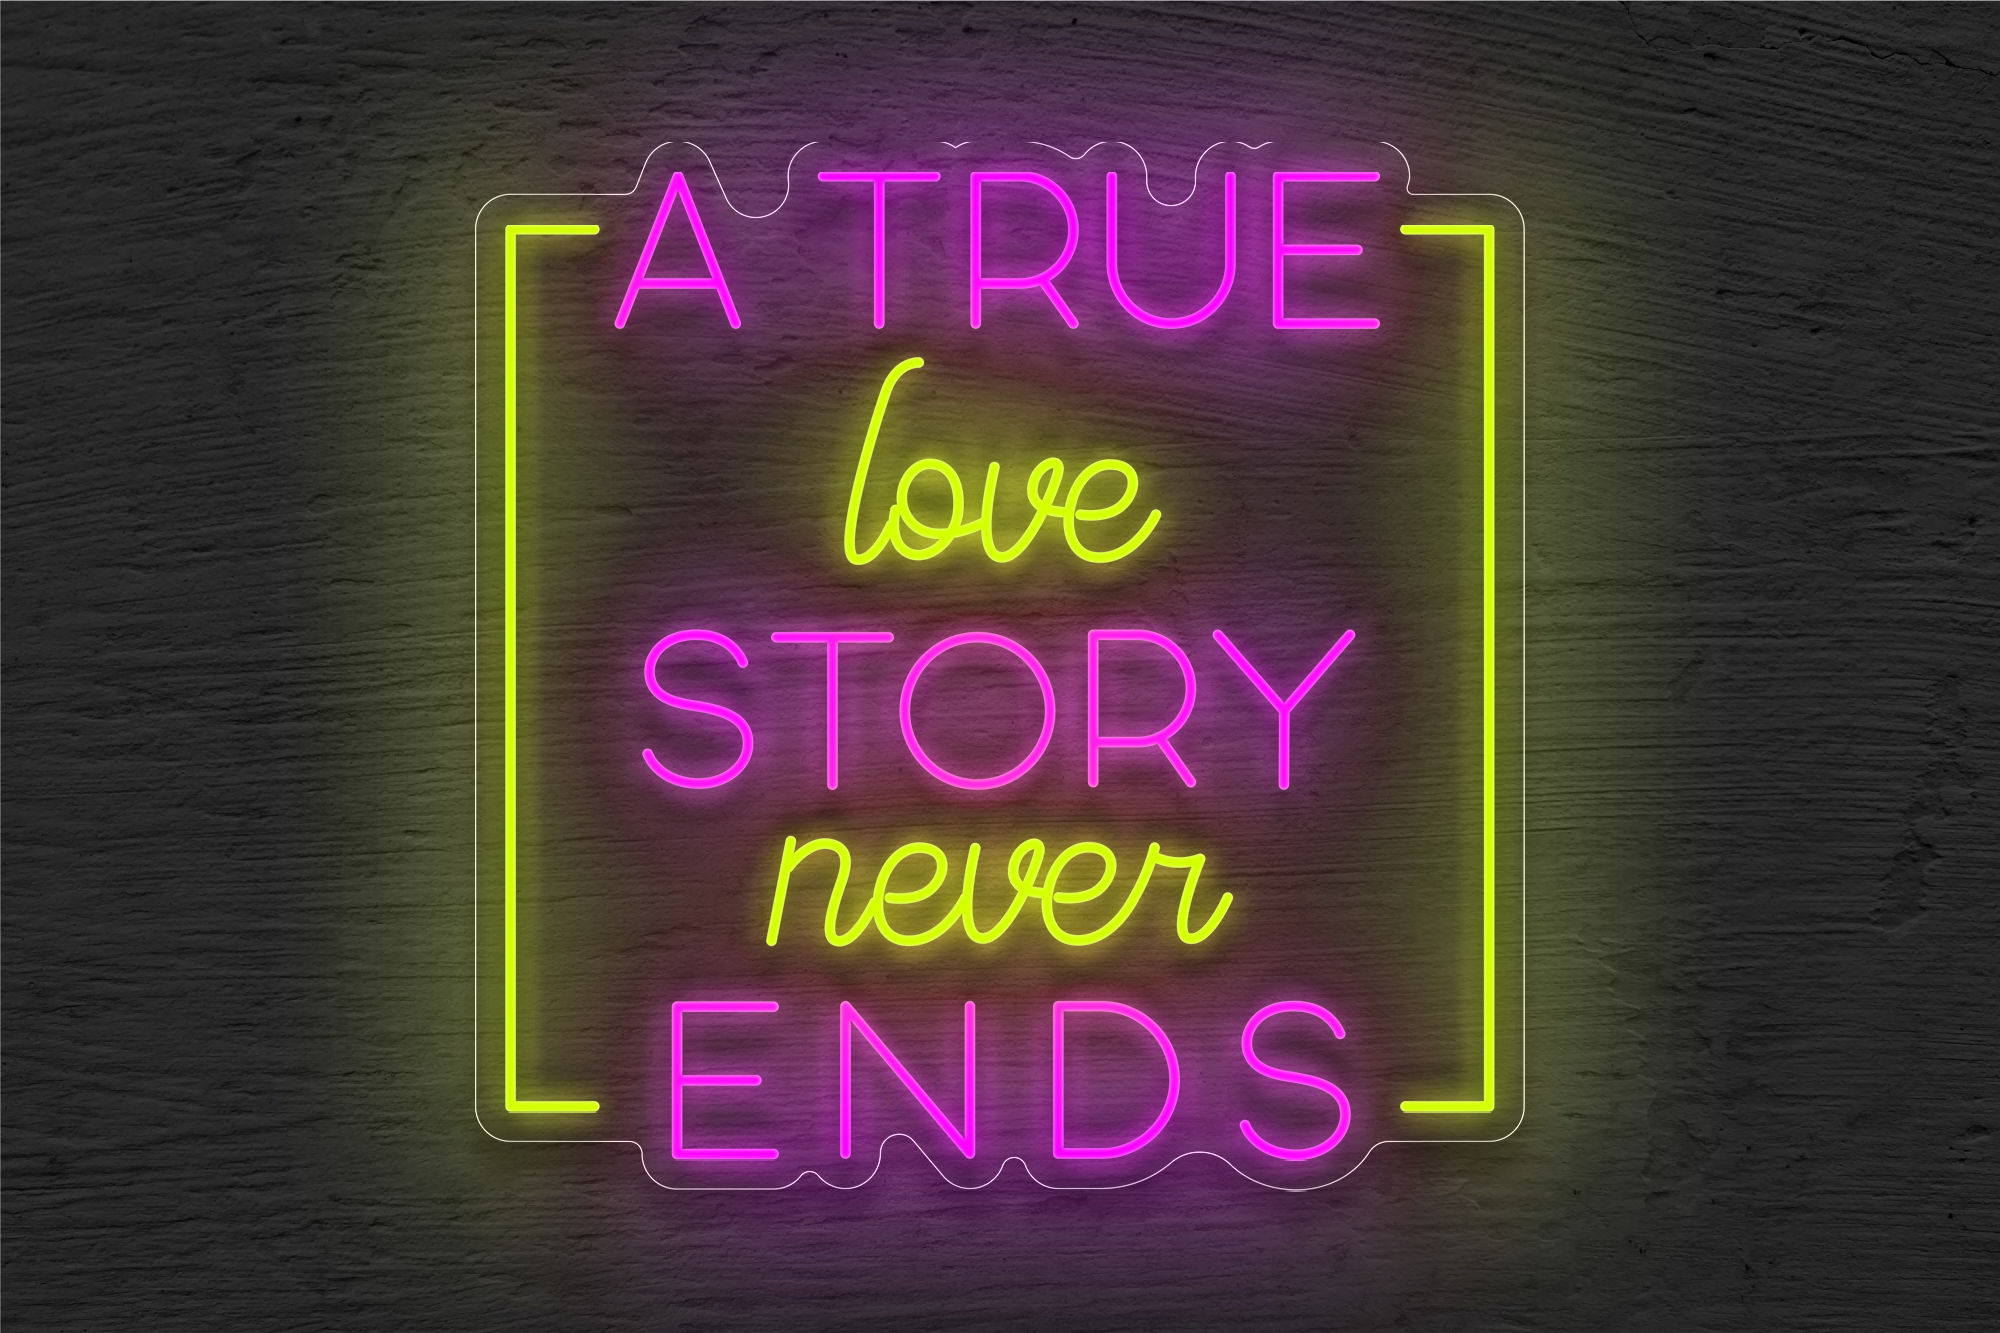 "A True Love Story Never Ends" with Border LED Neon Sign